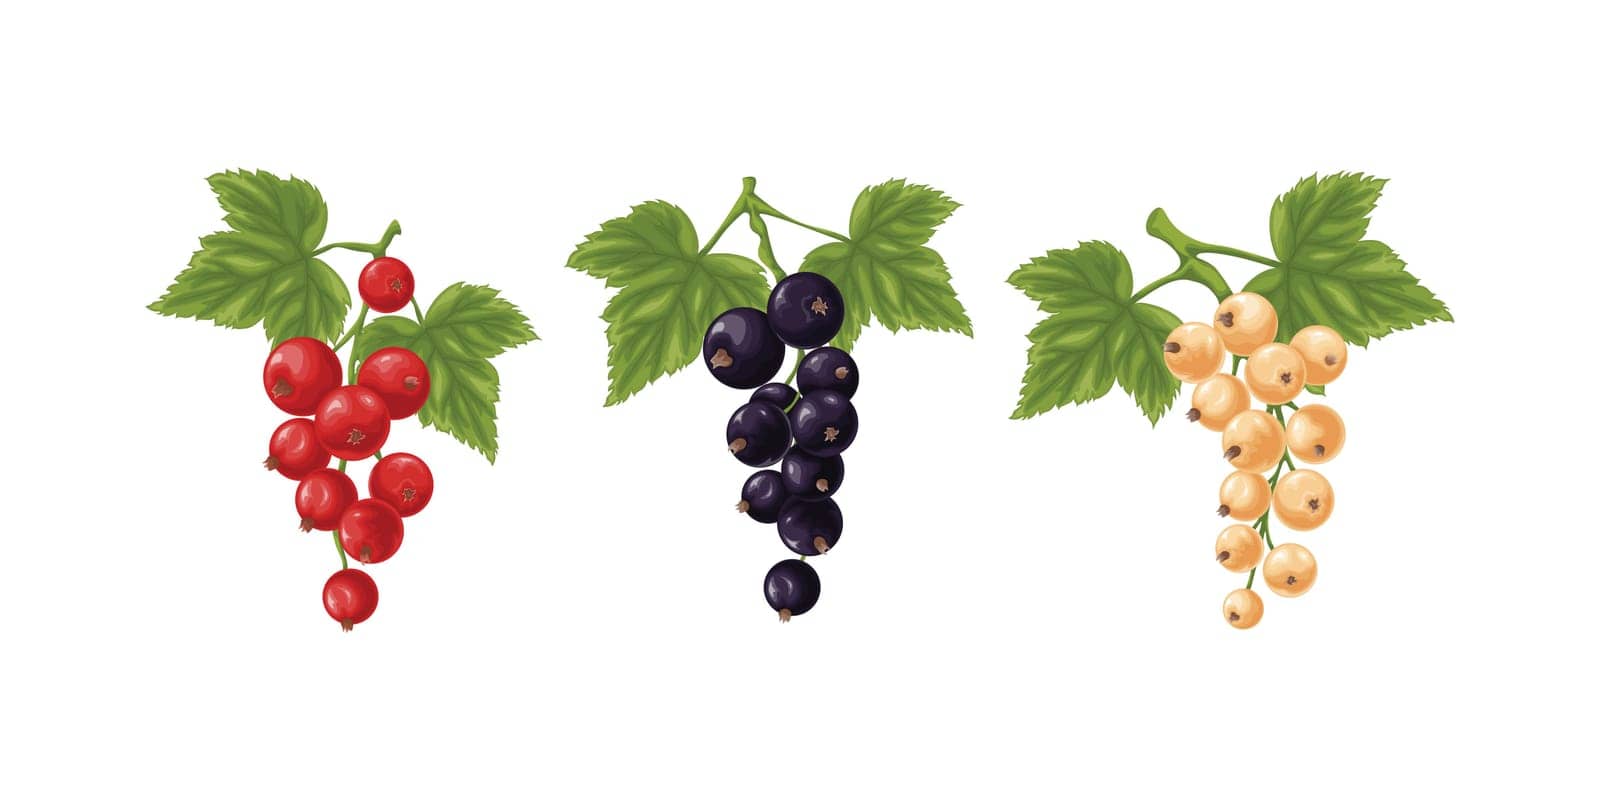 A set of white, red and black currants. Three branches with garters of white, red and black currants and green leaves. Twigs with ripe currant berries. Vector illustration on a white background.